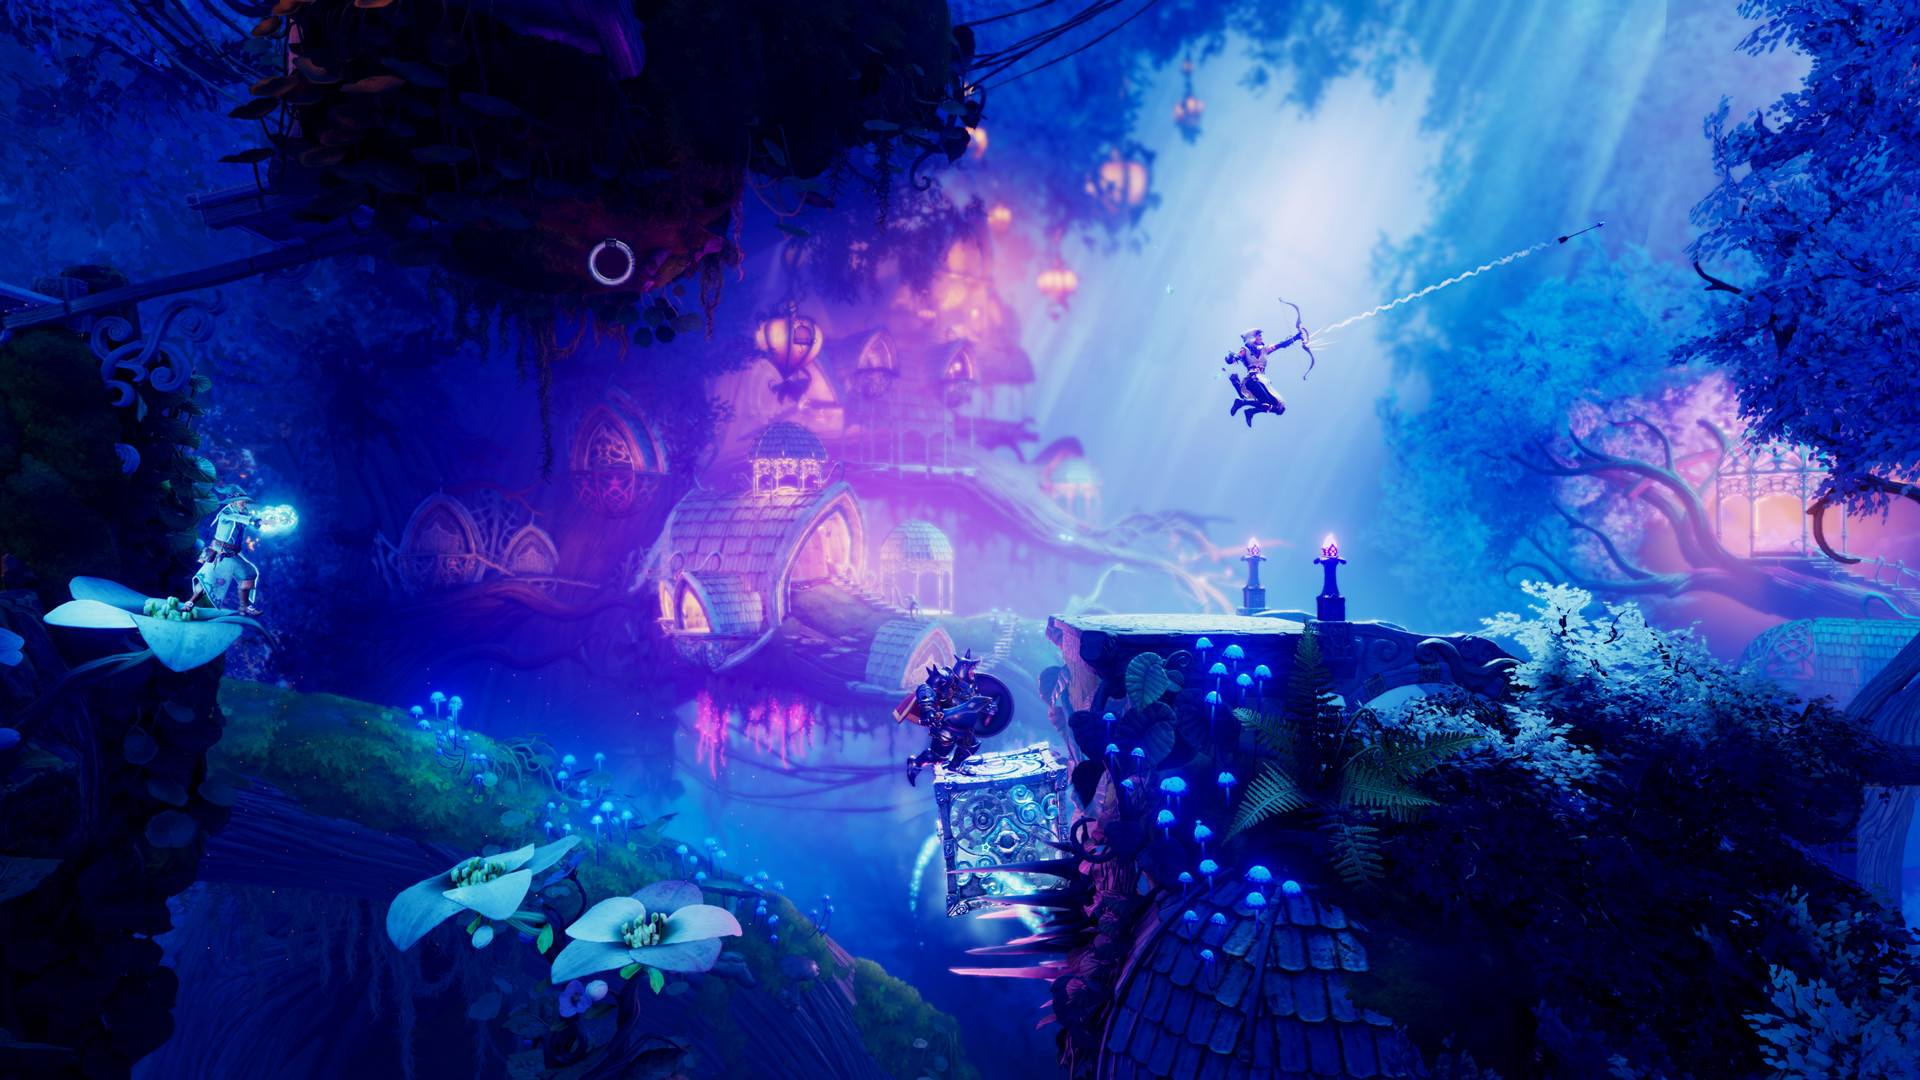 Trine 4: The Nightmare Prince Free Download